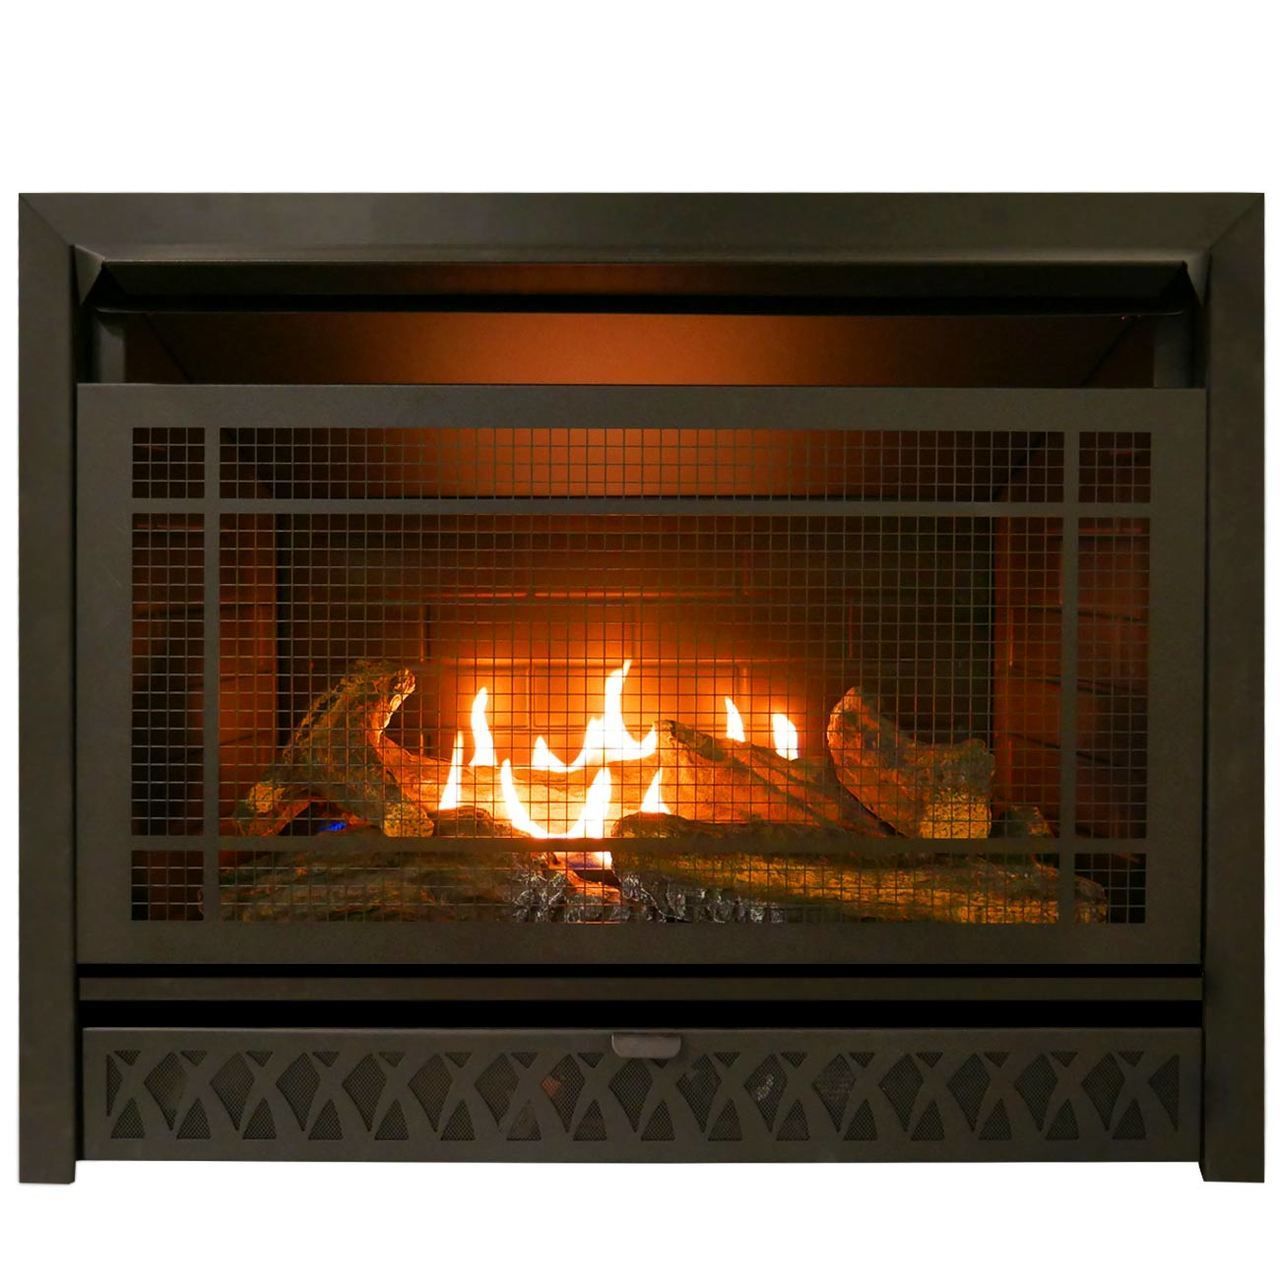 Gas Fireplace Insert with Remote Best Of Pro Fireplaces 29 In Ventless Dual Fuel Firebox Insert